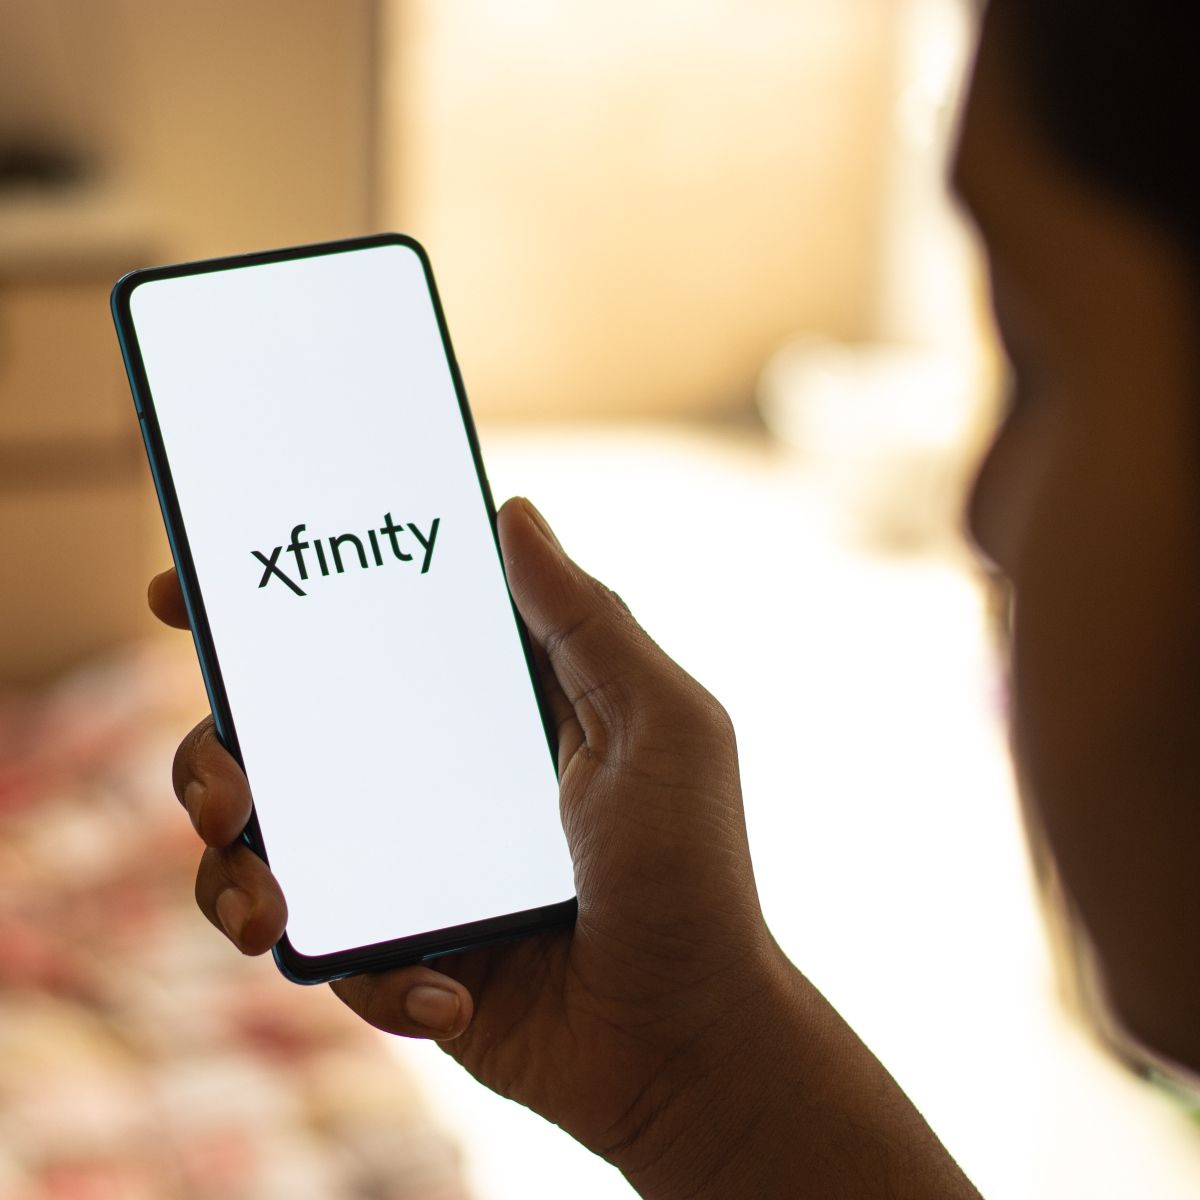 Person holding phone on the screen Xfinity logo